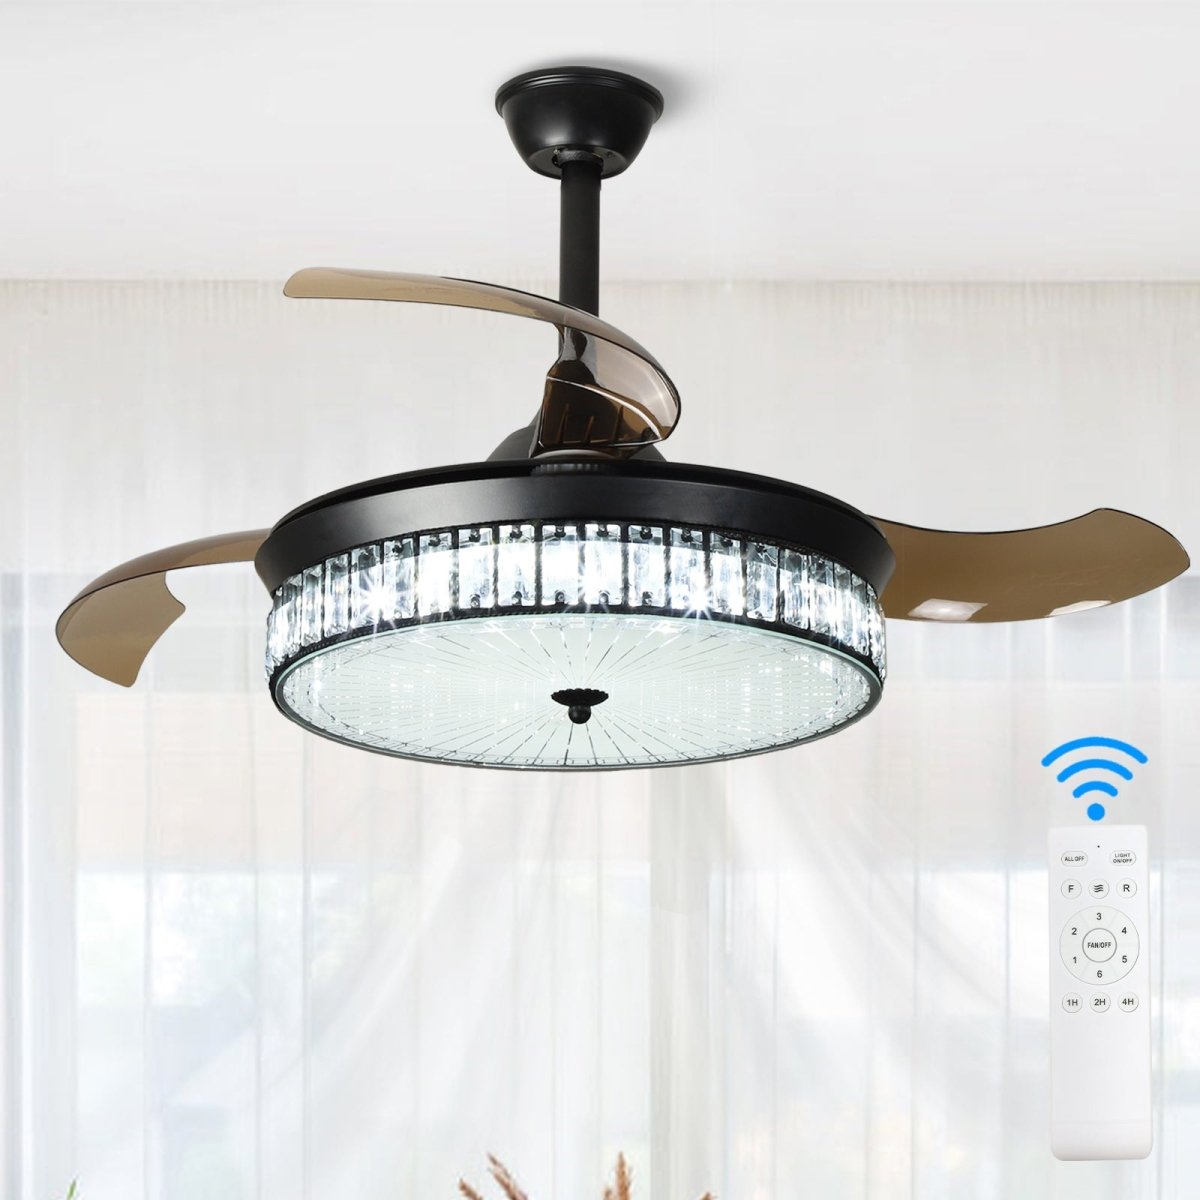 Depuley 42" Retractable Crystal Ceiling Fan with Light and Remote, Modern Fandelier with Reversible Invisible Blades, 3 Light Changes 6 Speeds, Noise-Free Chandelier Ceiling Fan for Bedroom, Living Room - WS-FPZ59-27C-BK 2 | DEPULEY